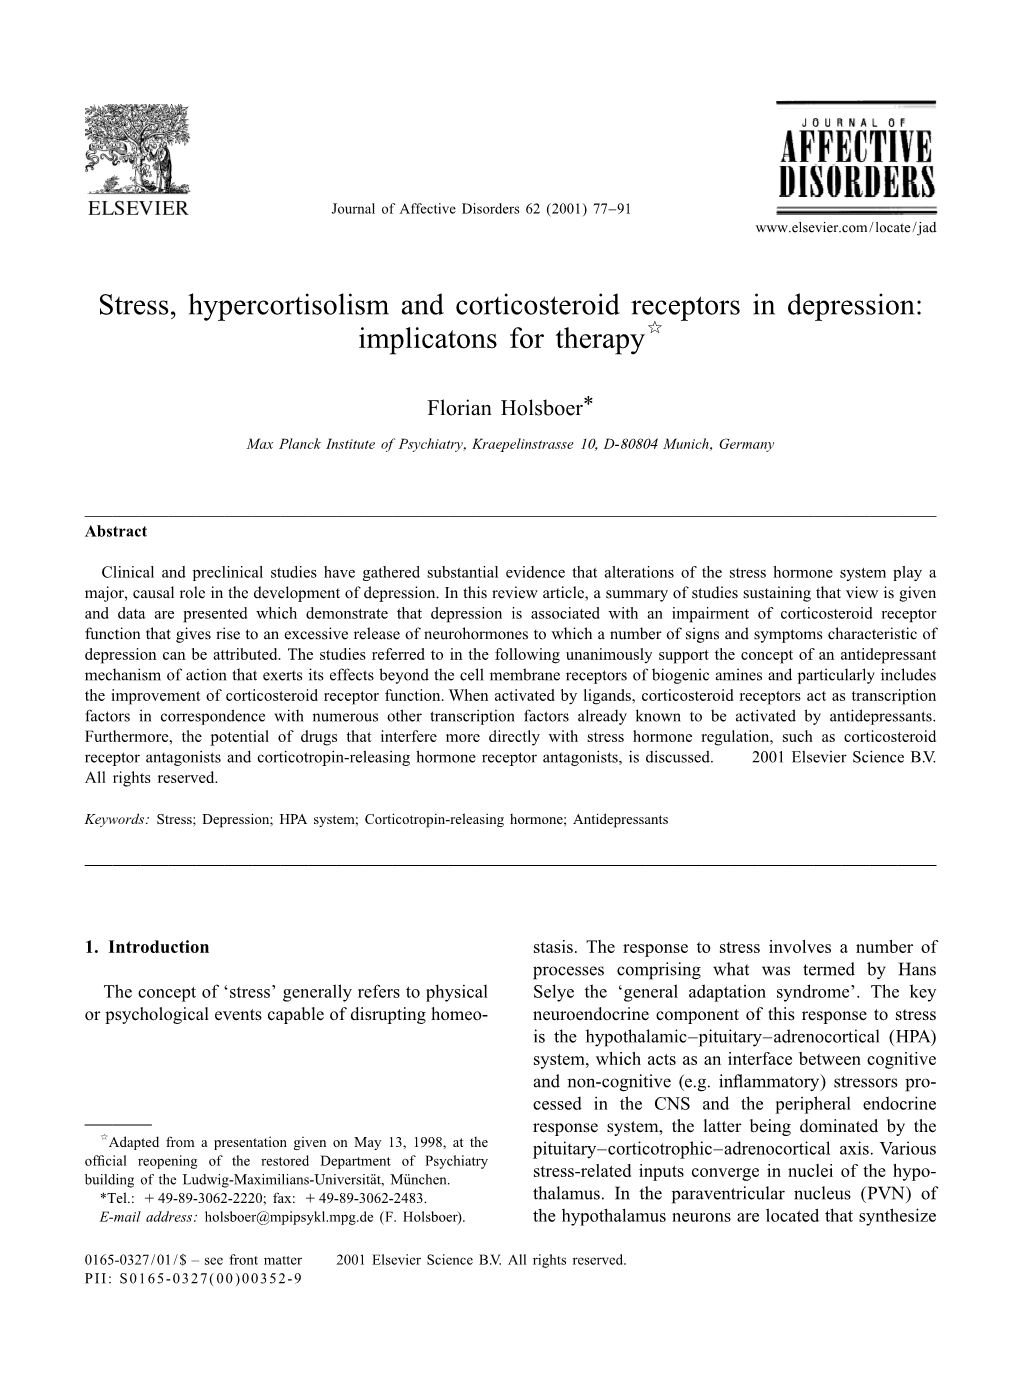 Stress, Hypercortisolism and Corticosteroid Receptors in Depression: Q Implicatons for Therapy